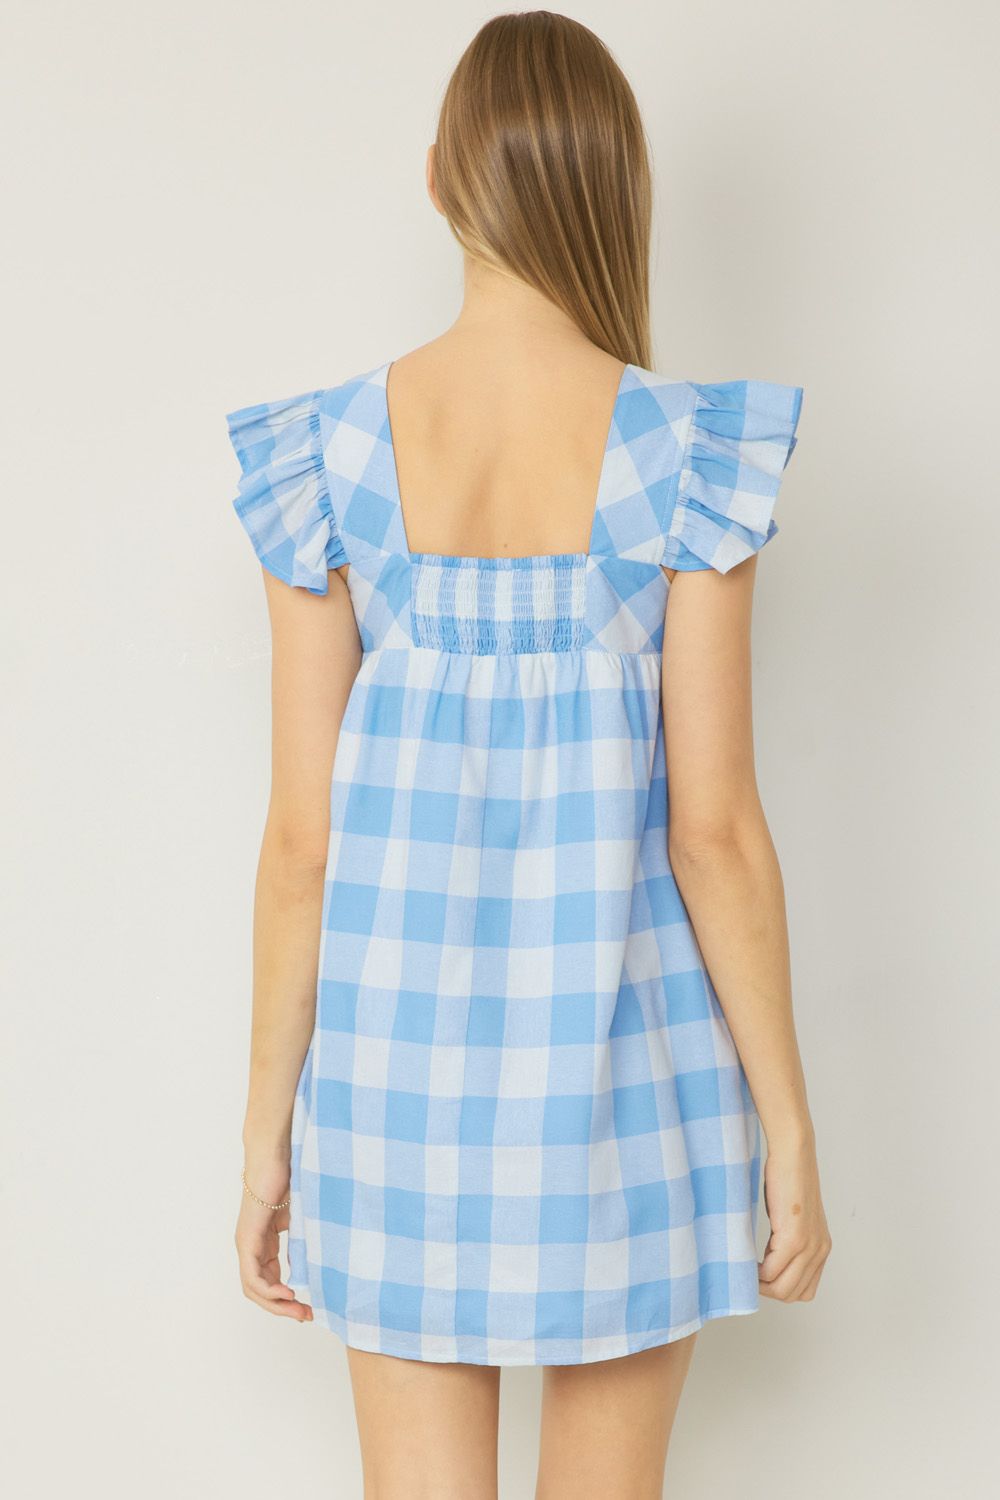 Picnic In The Park Dress - Blue